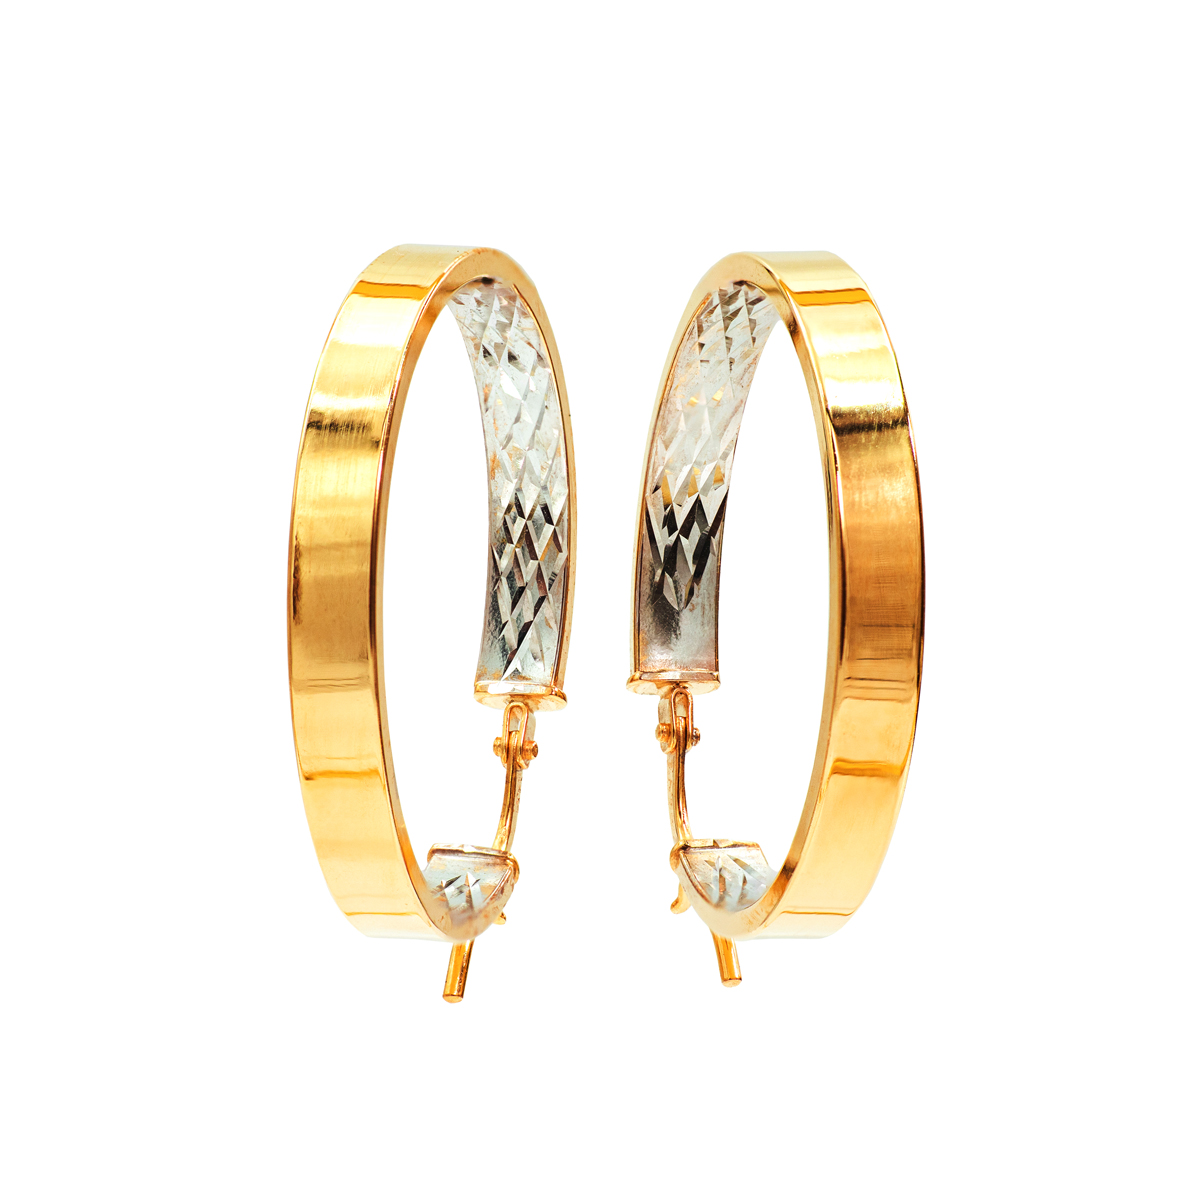 Two Tone Sculpted Box Hoop Earrings in 14k Yellow Gold